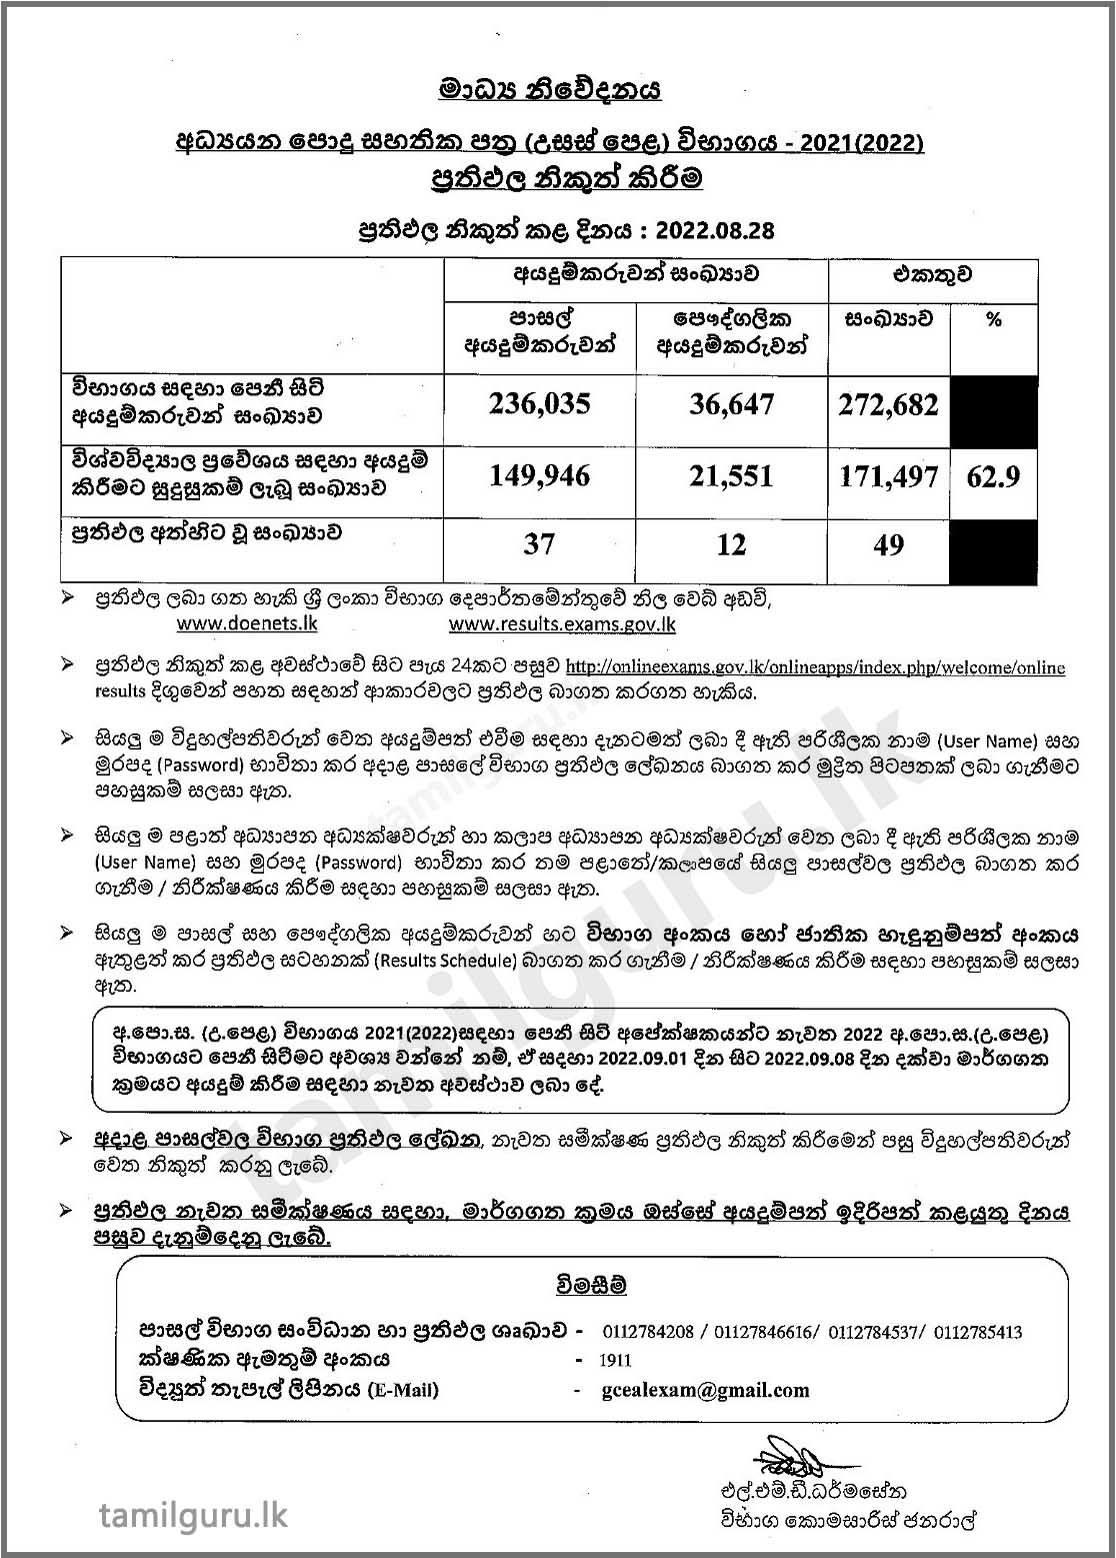 Press Release (Notice) from the Department of Examinations on G.C.E. A/L Examination Results 2021 (2022) (Details in Sinhala)